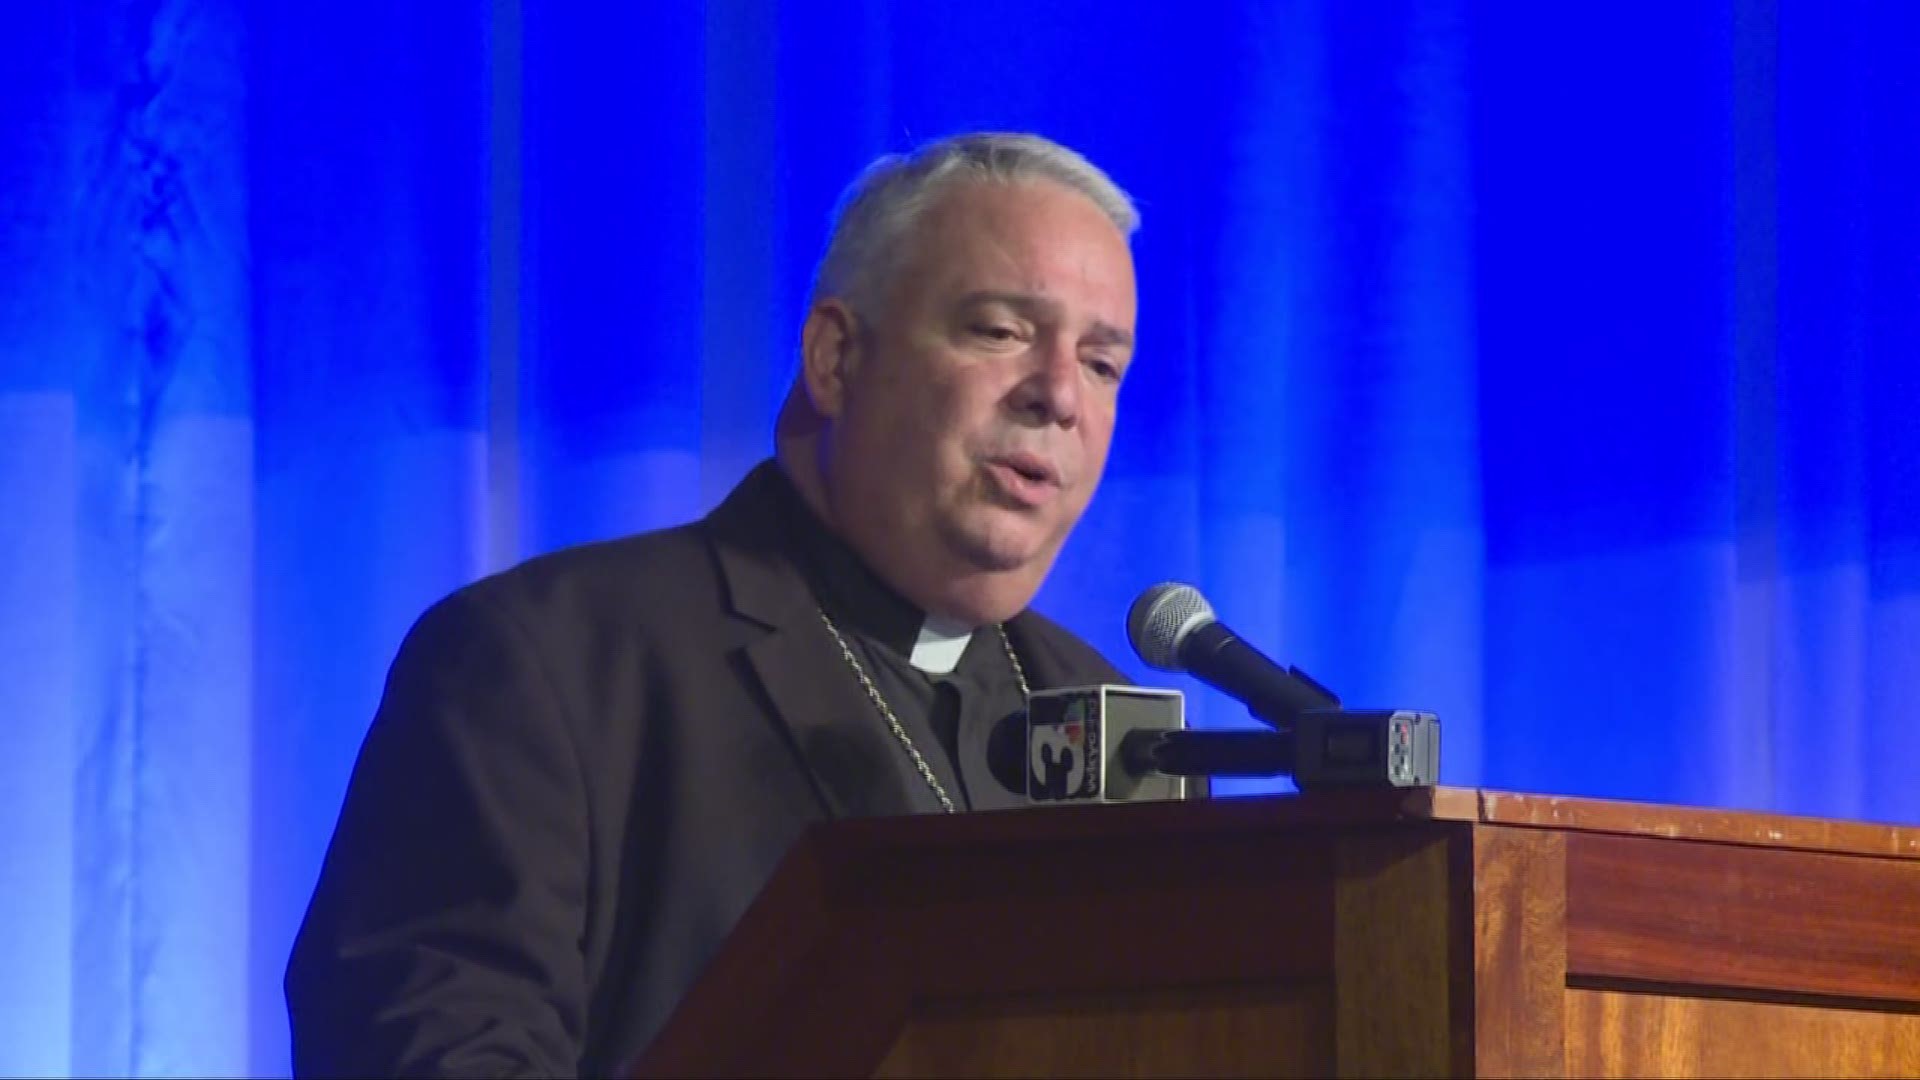 Bishop of Cleveland Nelson Perez speaks on immigration crisis